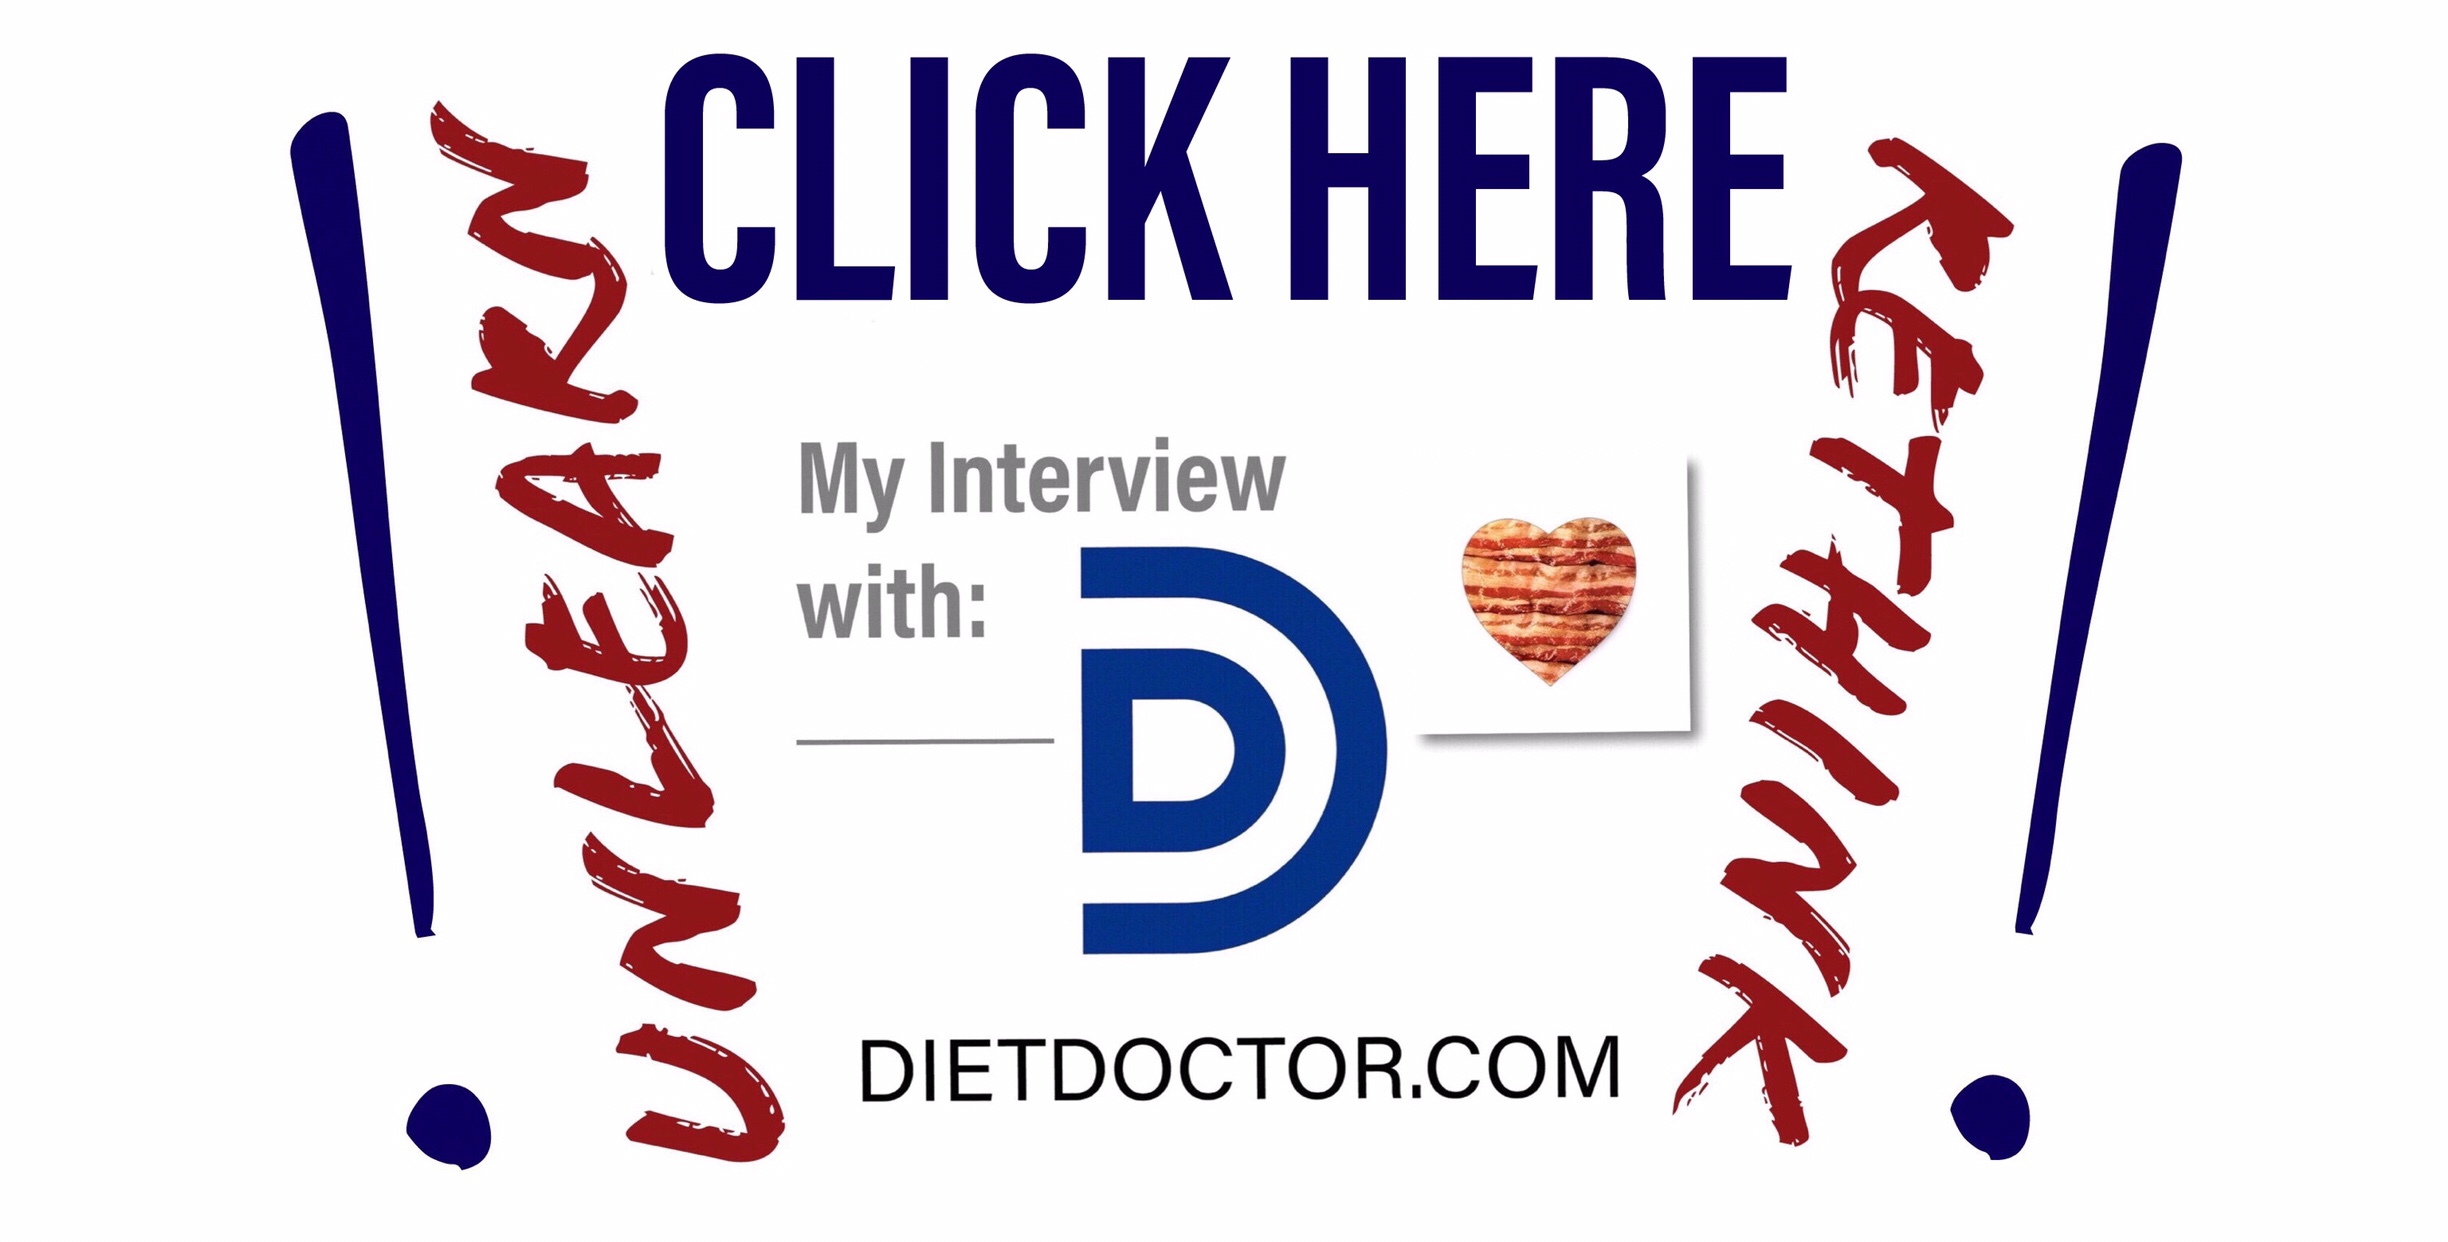 https://www.dietdoctor.com/keto-diet-completely-changed-life